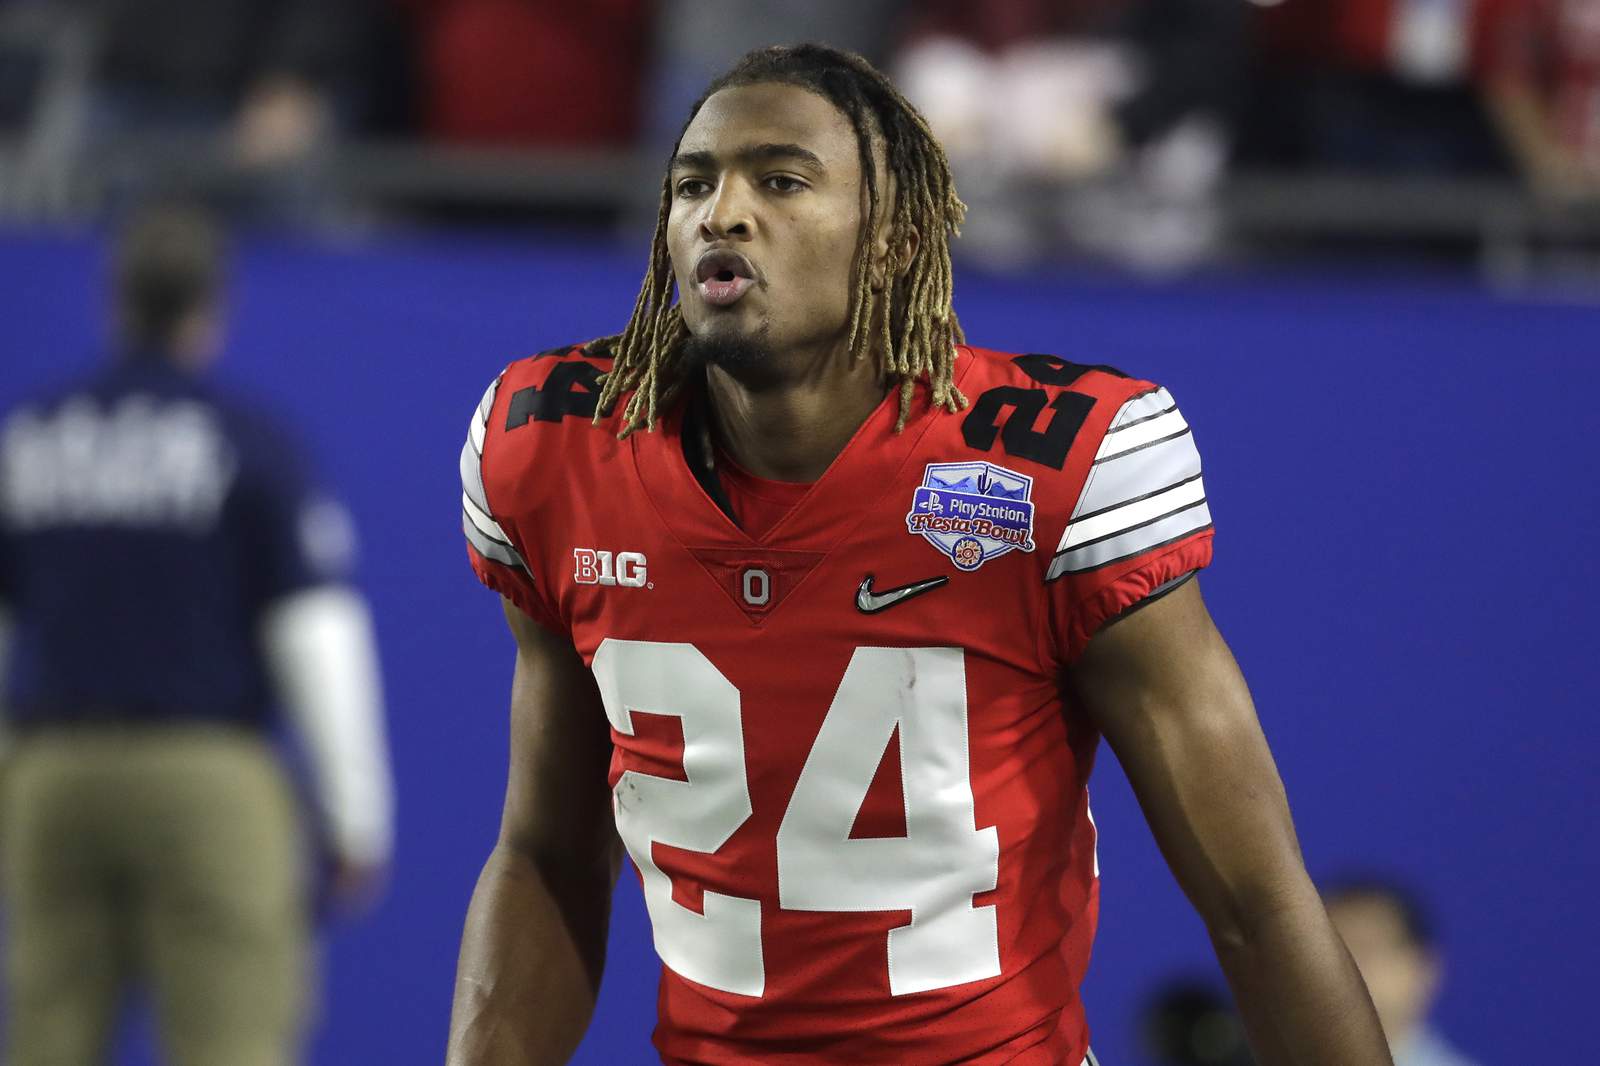 Tired of waiting: Ohio State stars opt out, move on to draft